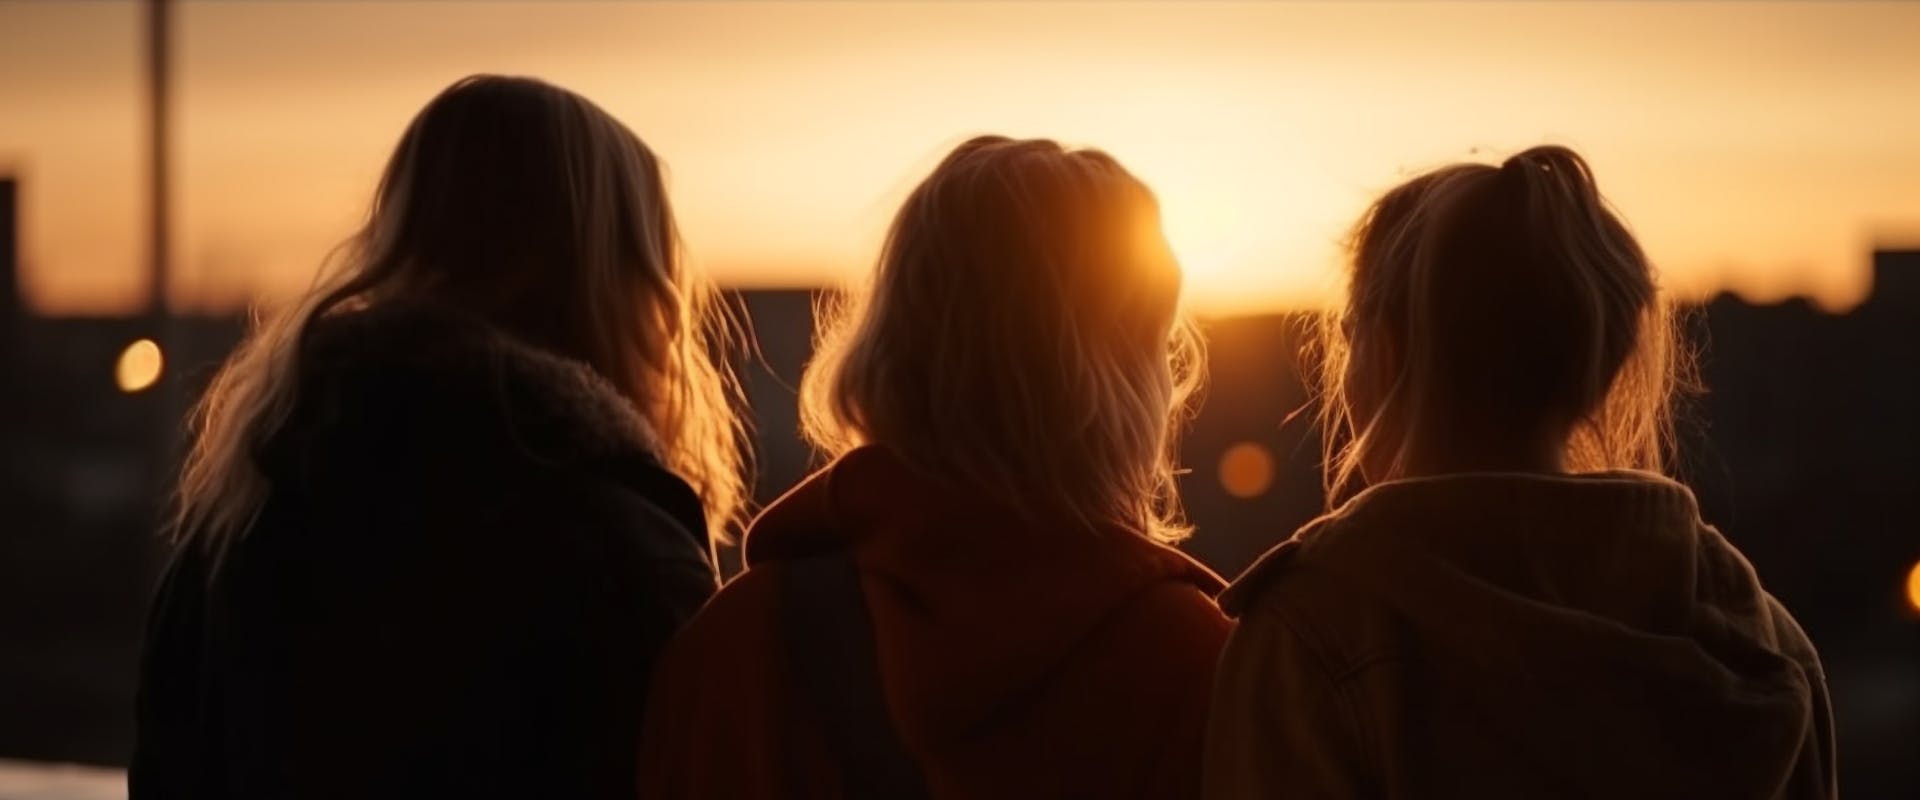 three solo travelers watching a sunset